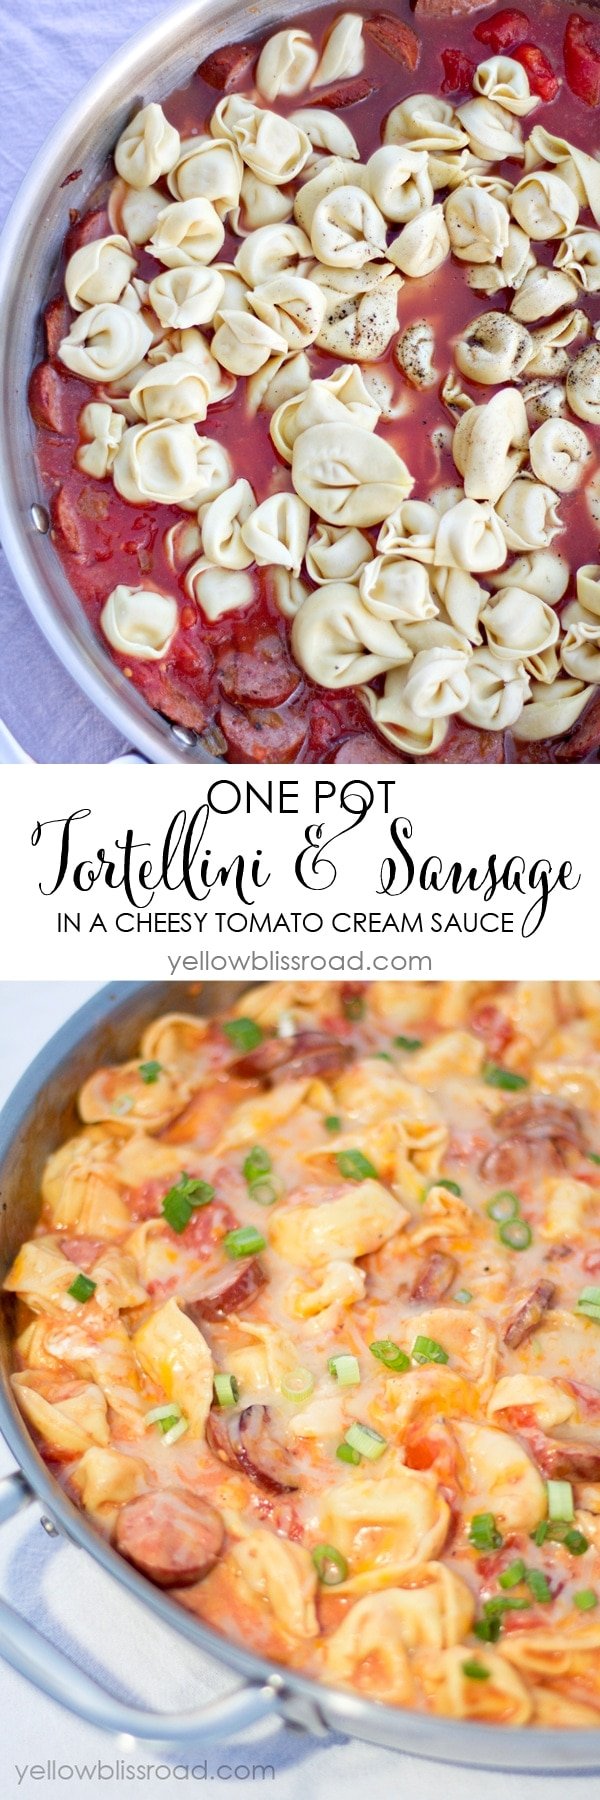 One Pan Creamy Tortellini and Smoked Sausage is a quick and delicious meal that combines tender, cheese-filled pasta with smokey sausage in a creamy sauce.